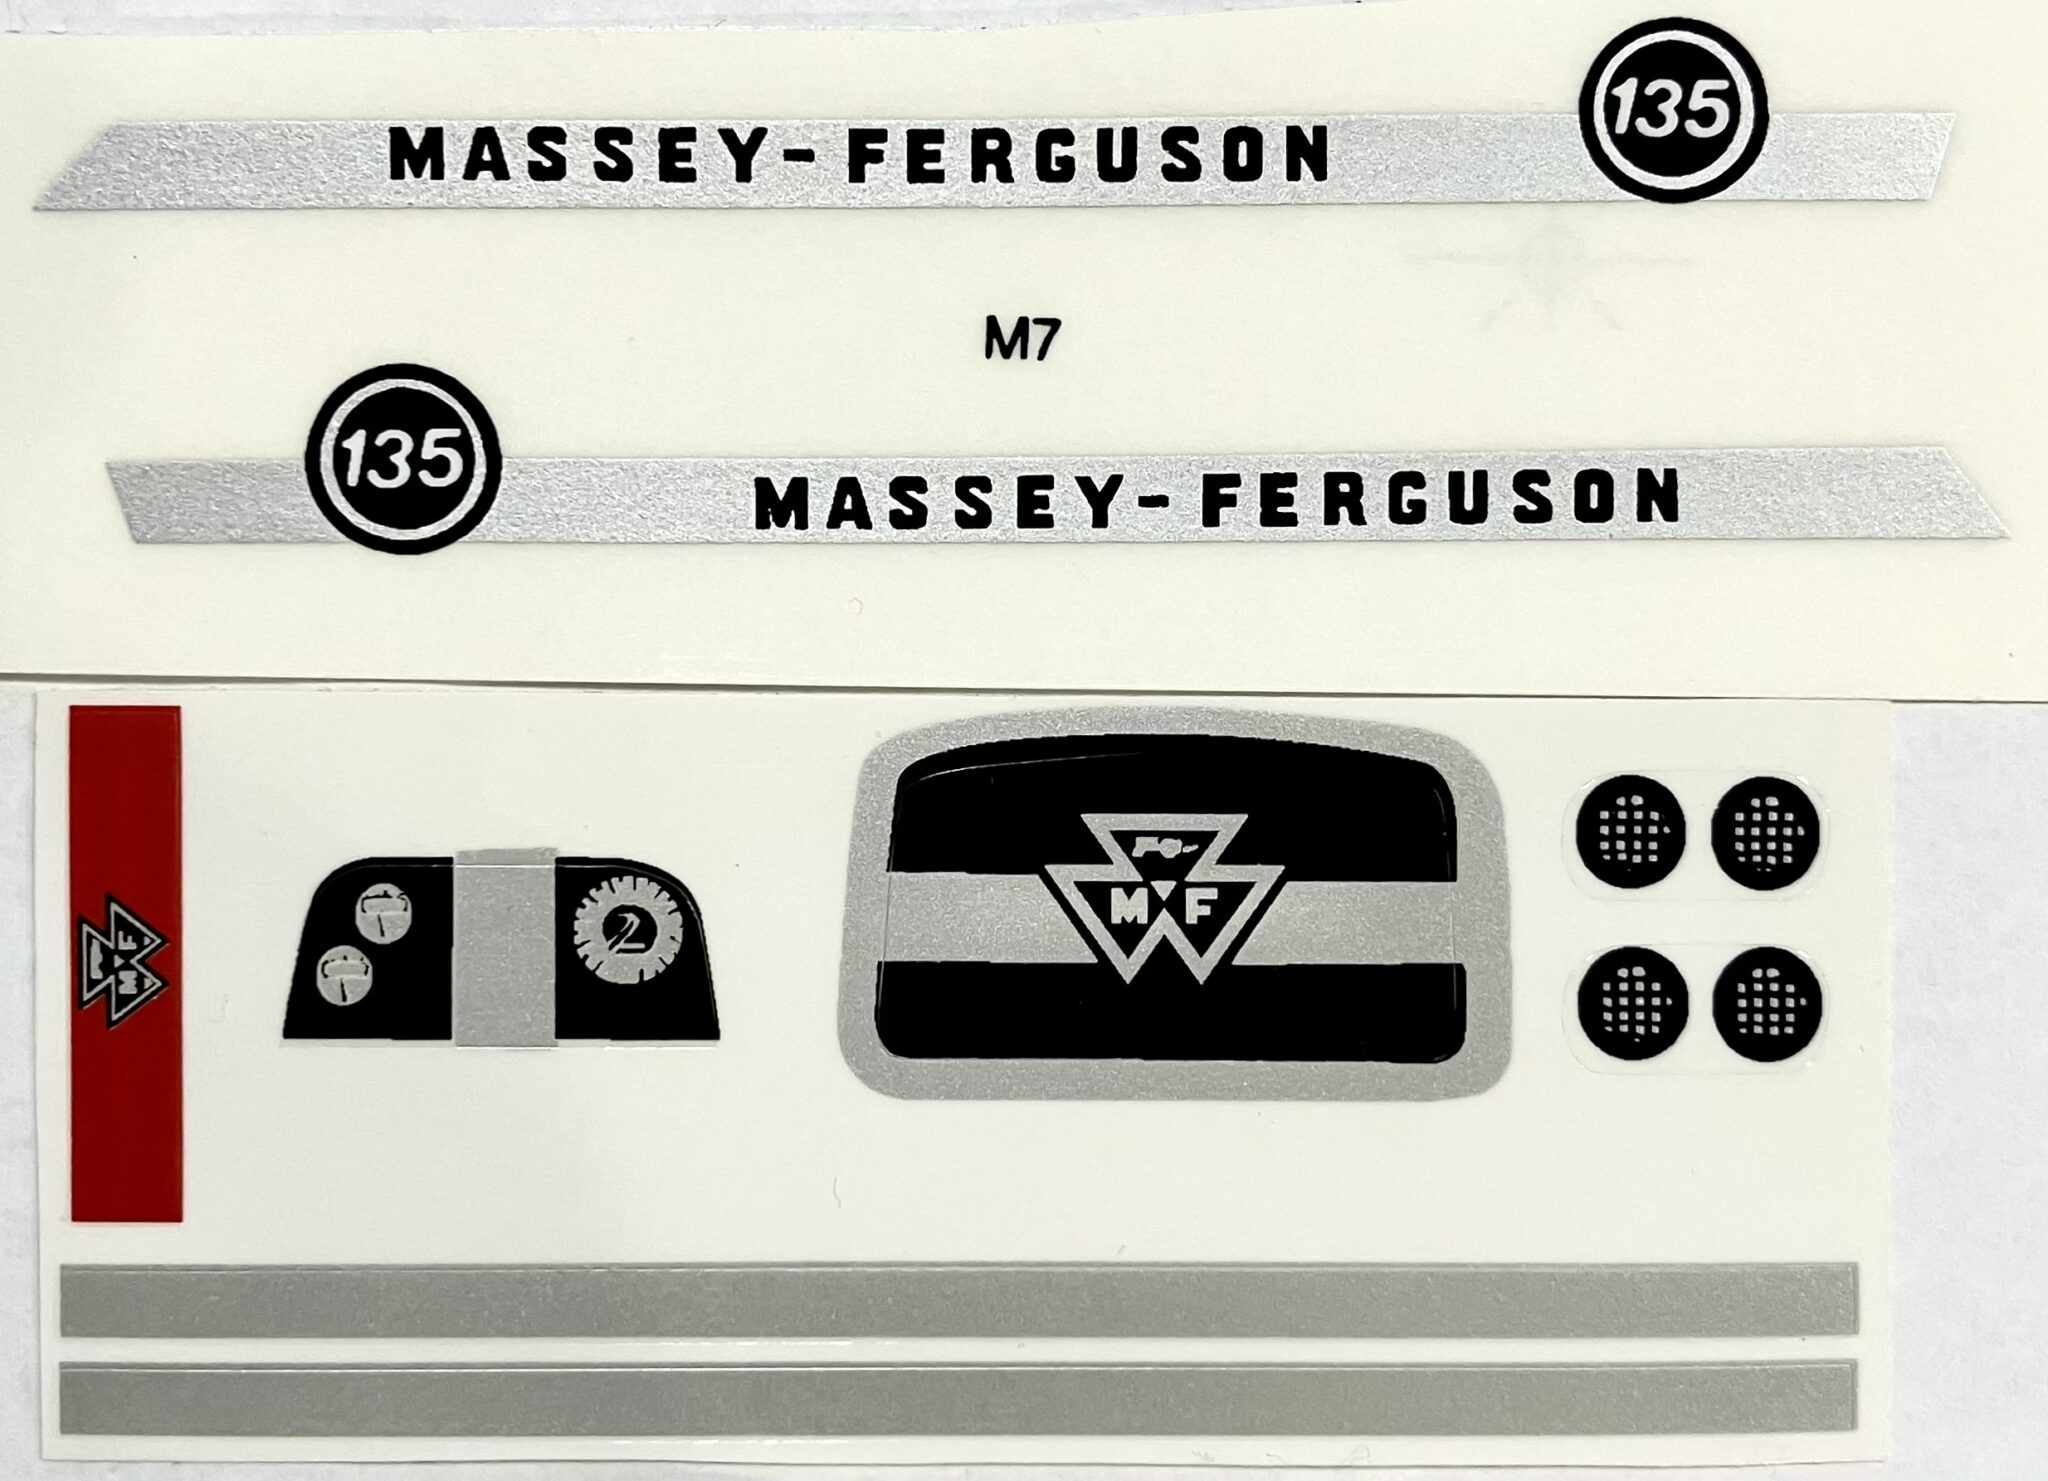 Massey Ferguson Decals Archives - Midwest Decals & Farm Toys